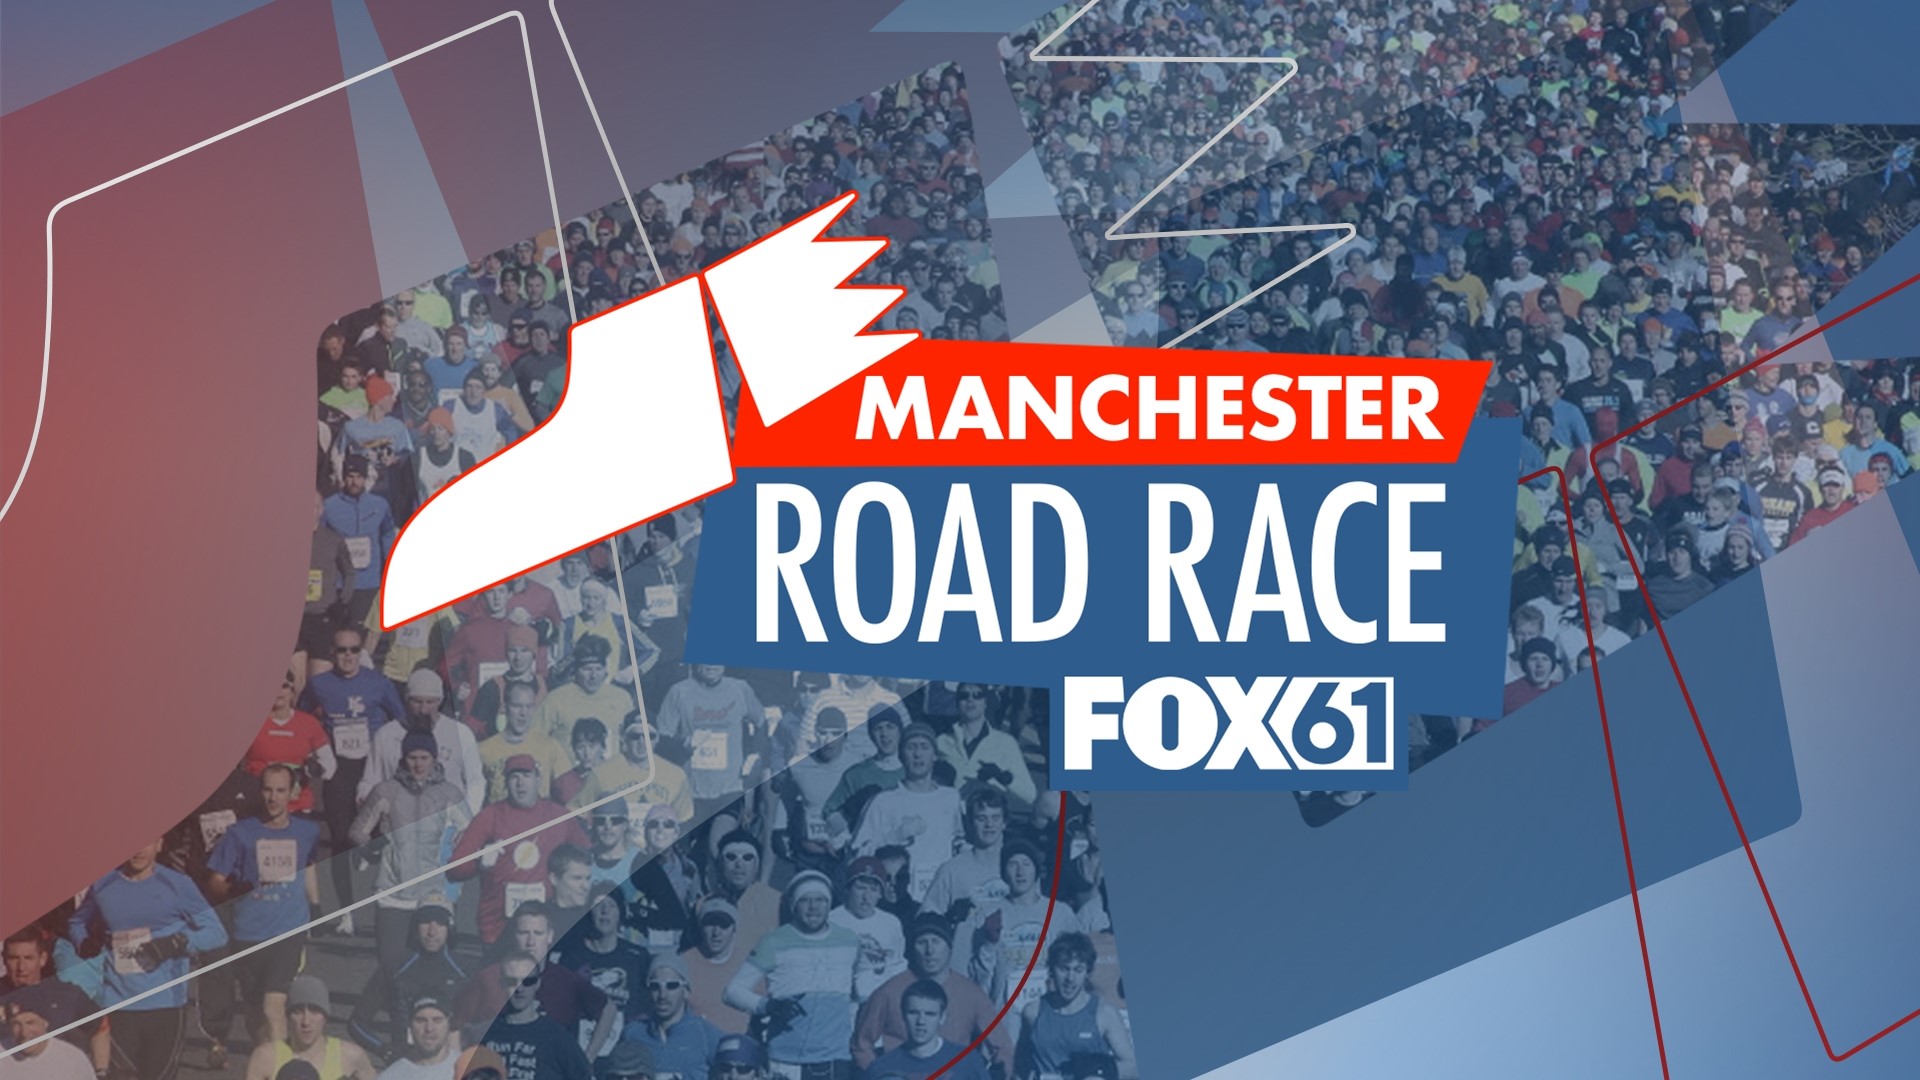 The 86th annual Manchester Road Race took place on Thanksgiving Day. More than 10,000 runners from across the world ran the iconic 4.748-mile road race.